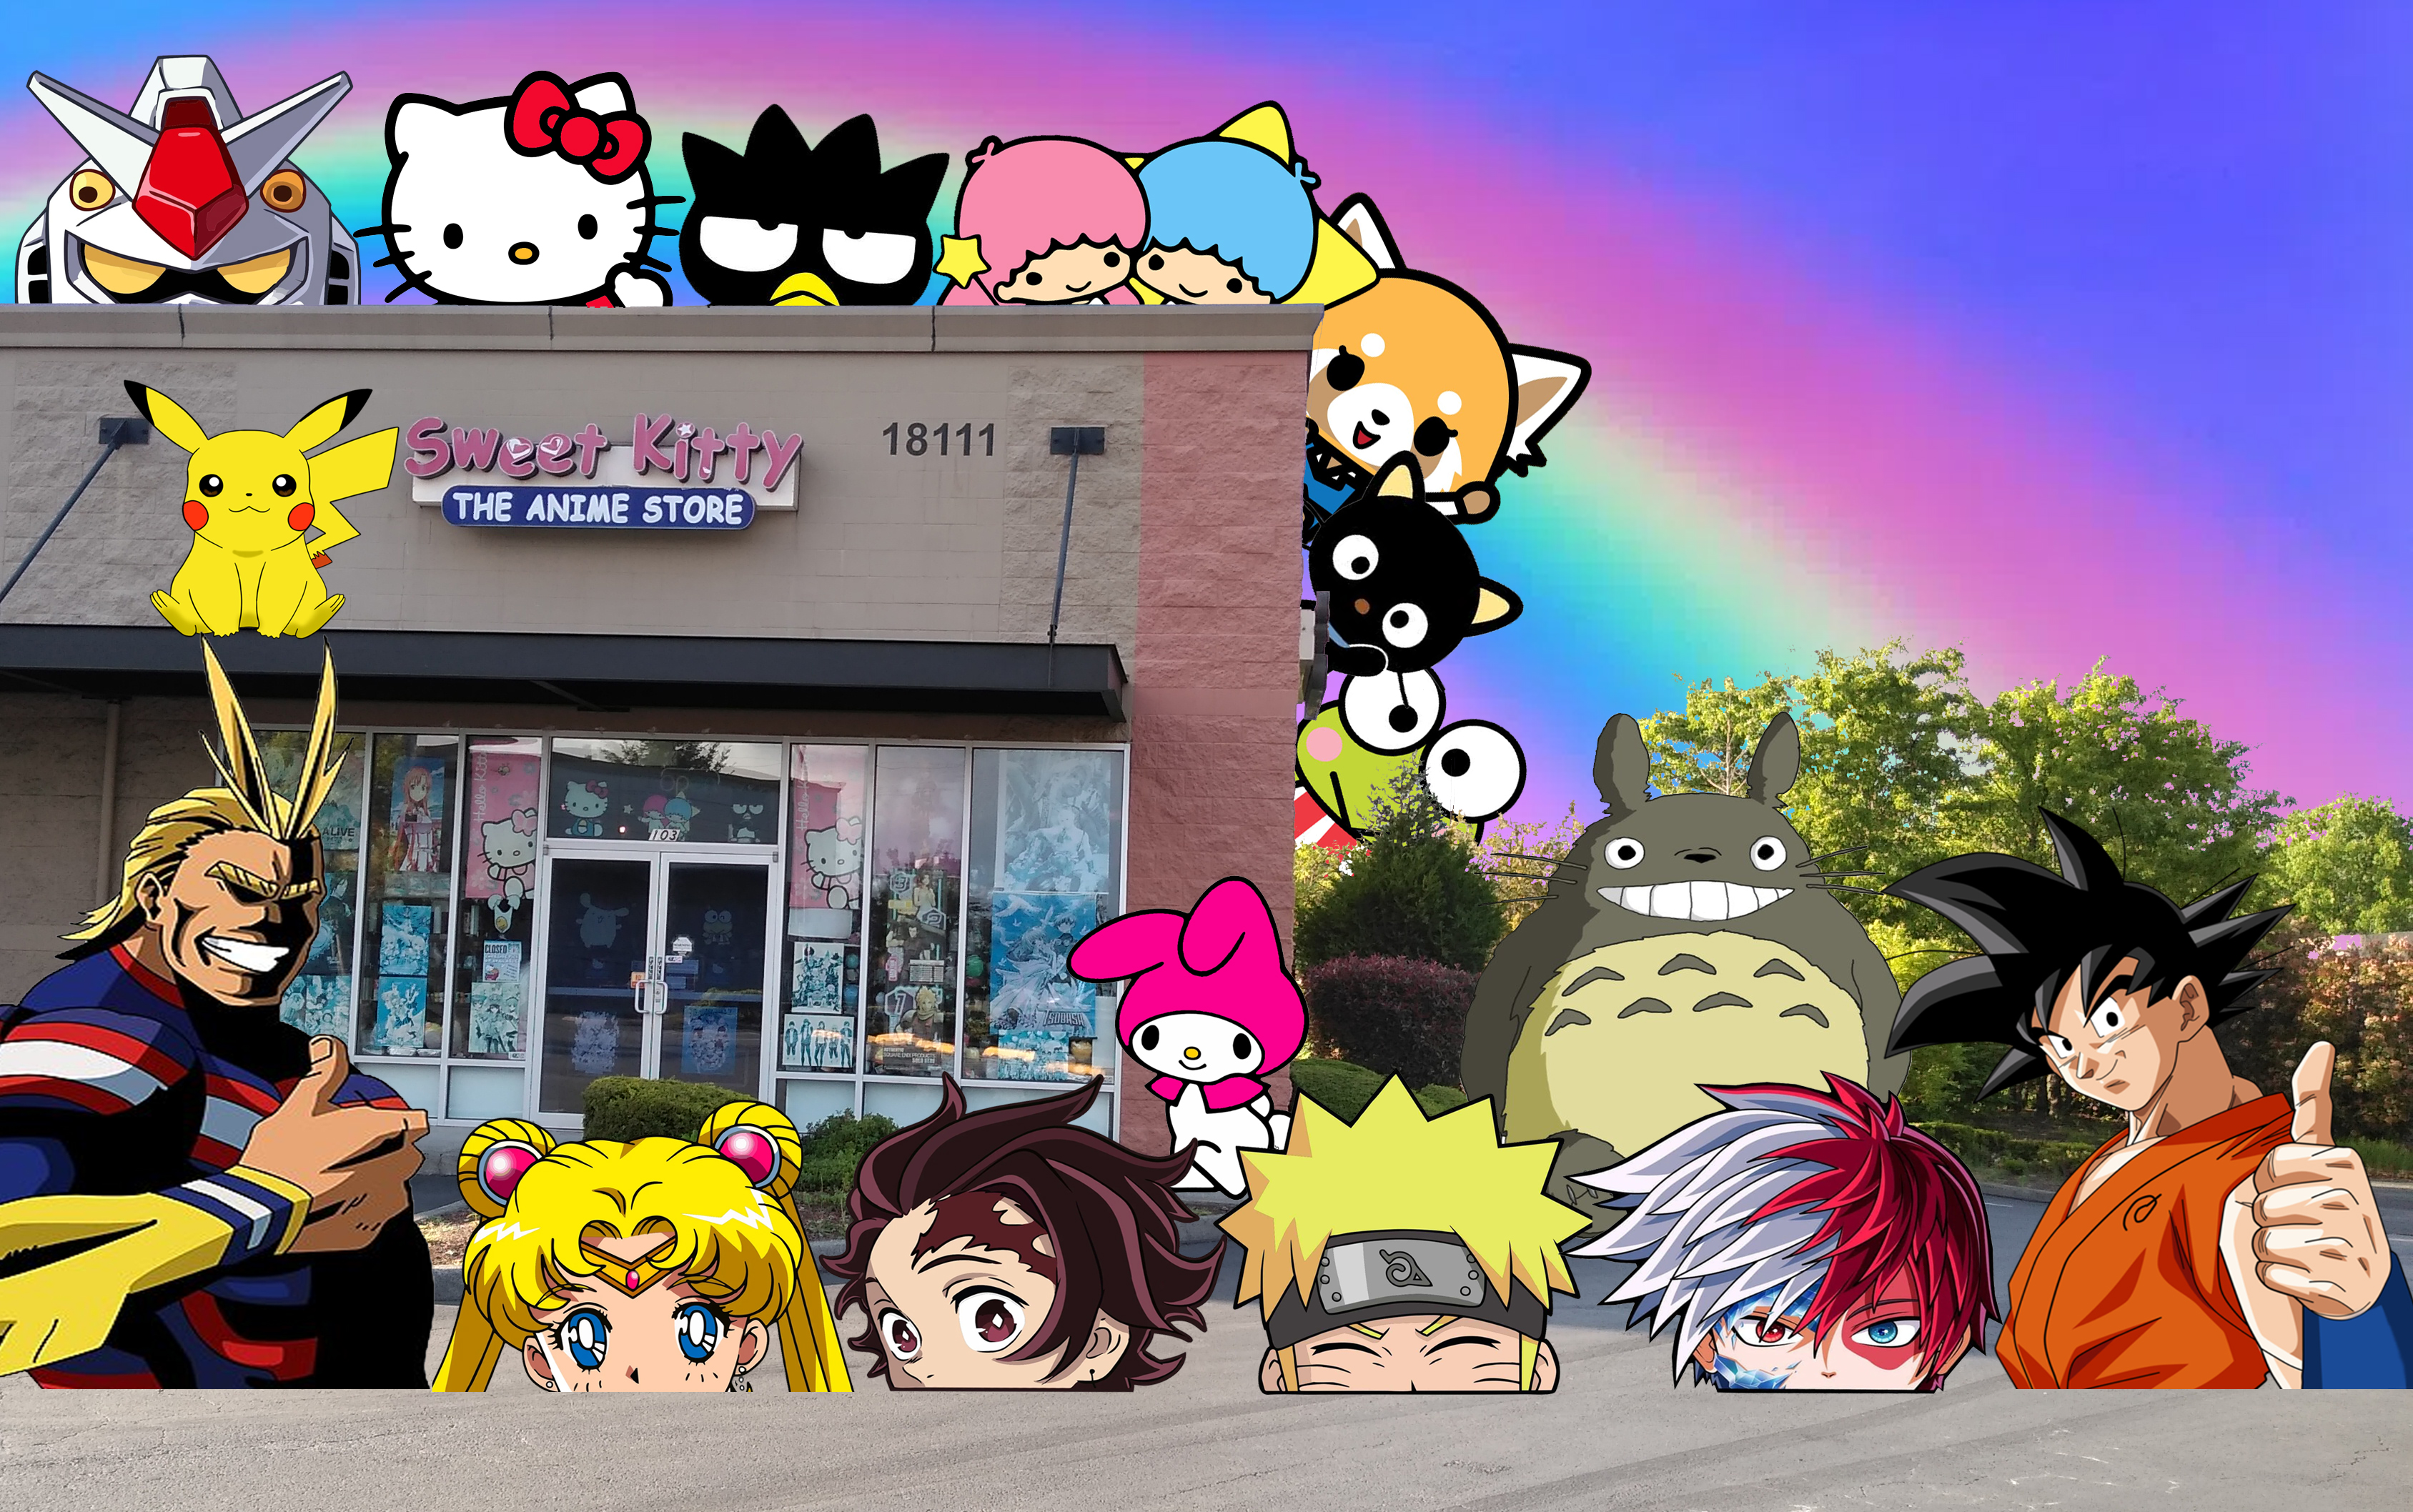 Sweet Kitty, The Anime Store